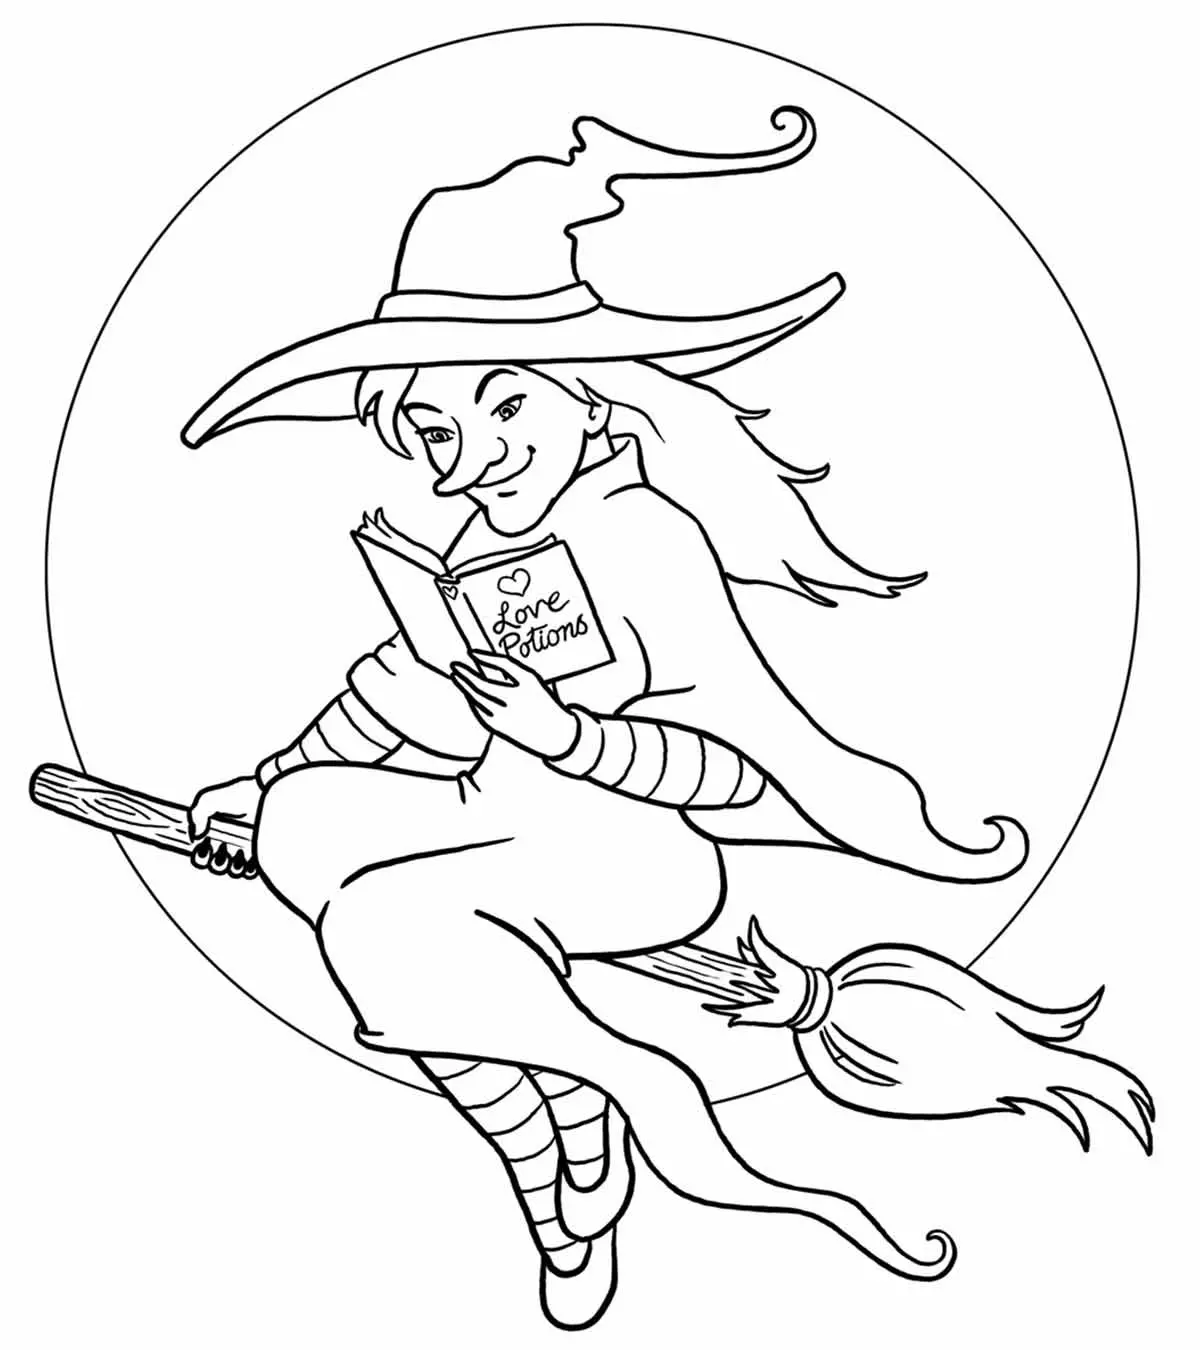 Top 15 The Wizard Of Oz Coloring Pages For Your Toddler